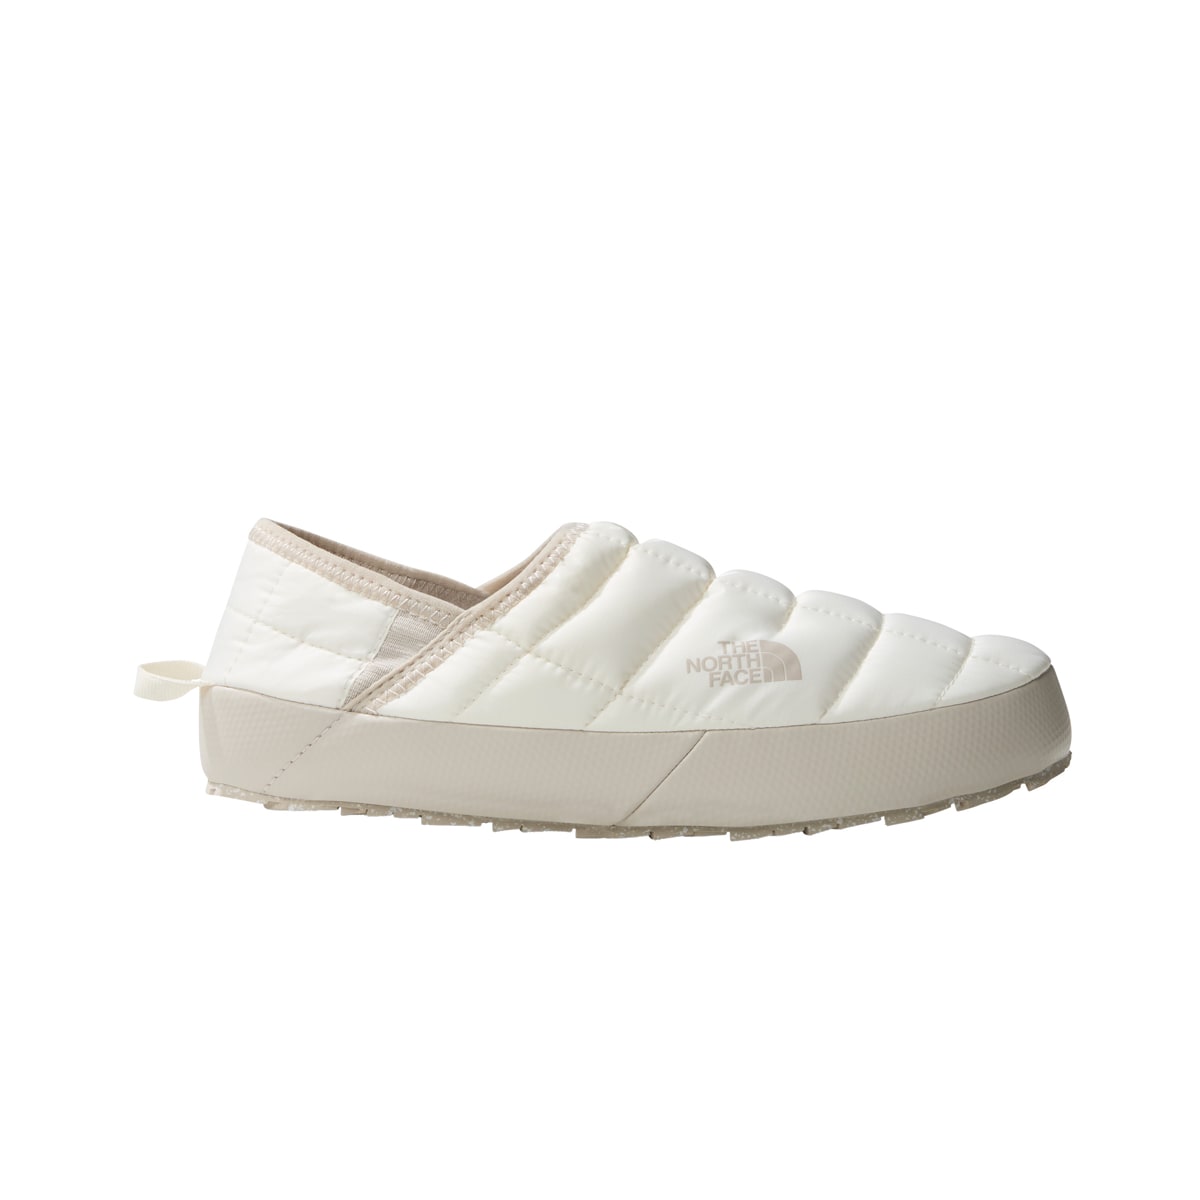 The North Face Women's Thermoball Traction Mule V GARDENIA WHITE/SILVERGREY